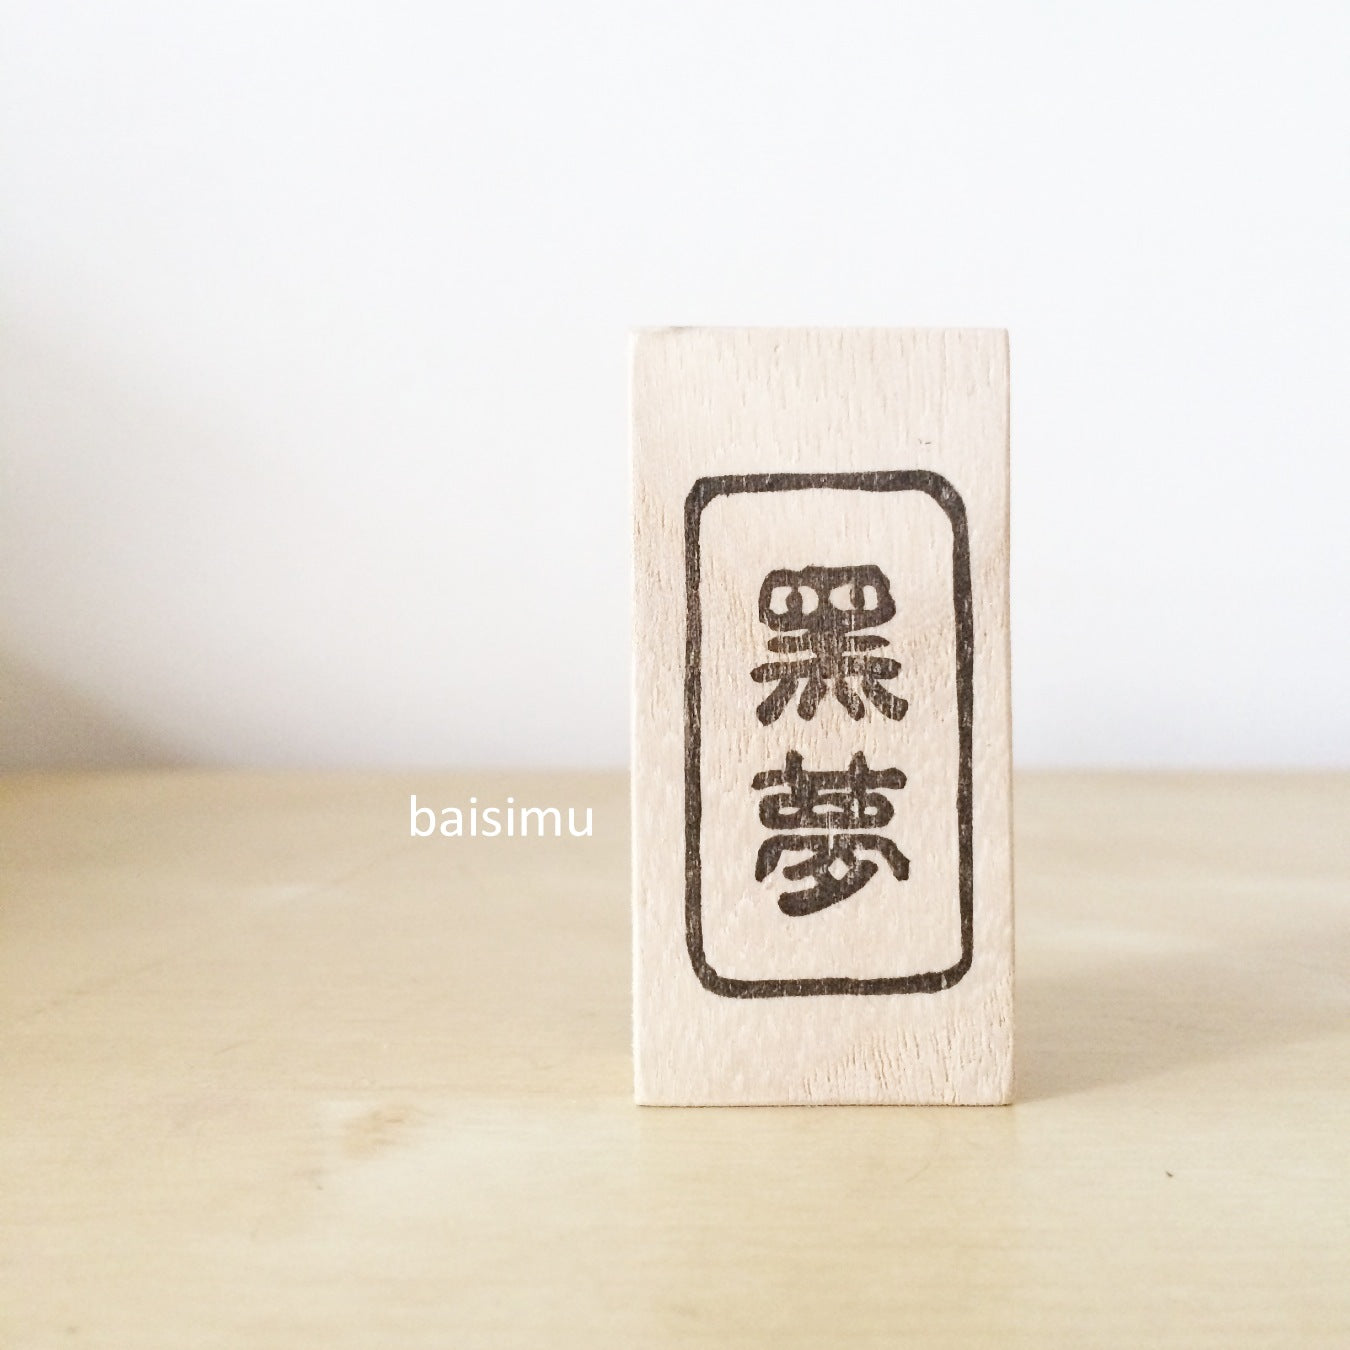 Customized Chinese name stamp